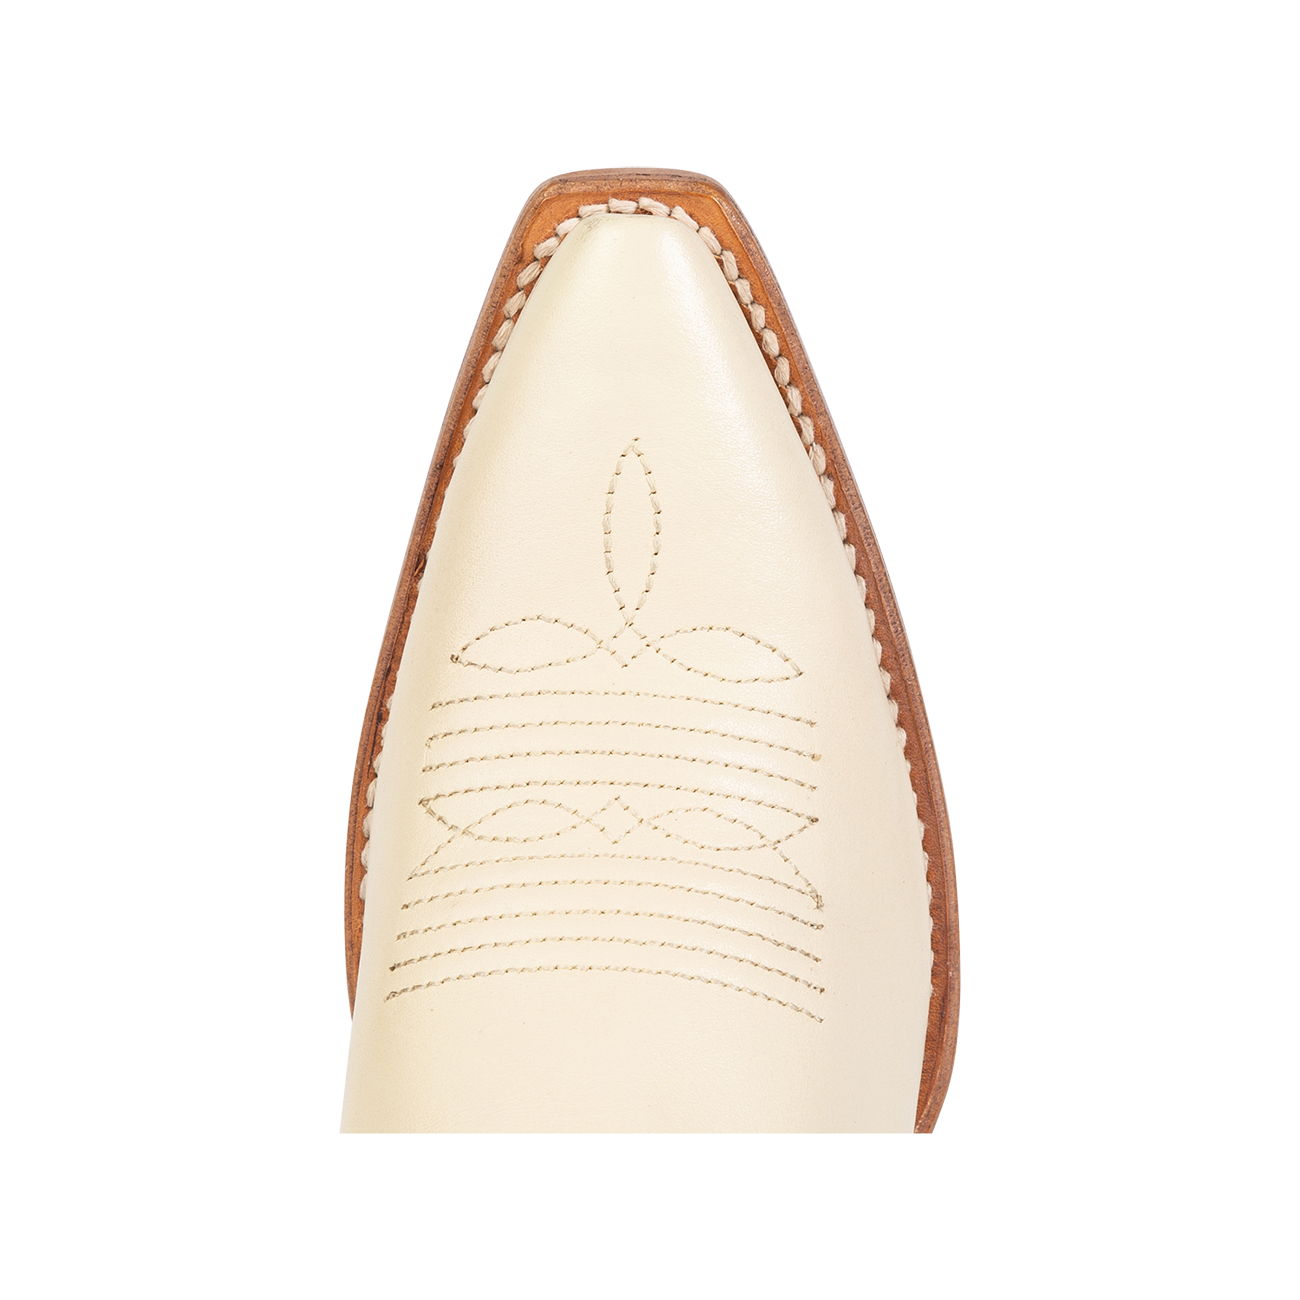 Top view showing snip toe construction with stitch detailing on FREEBIRD women's Woodland beige leather boot 